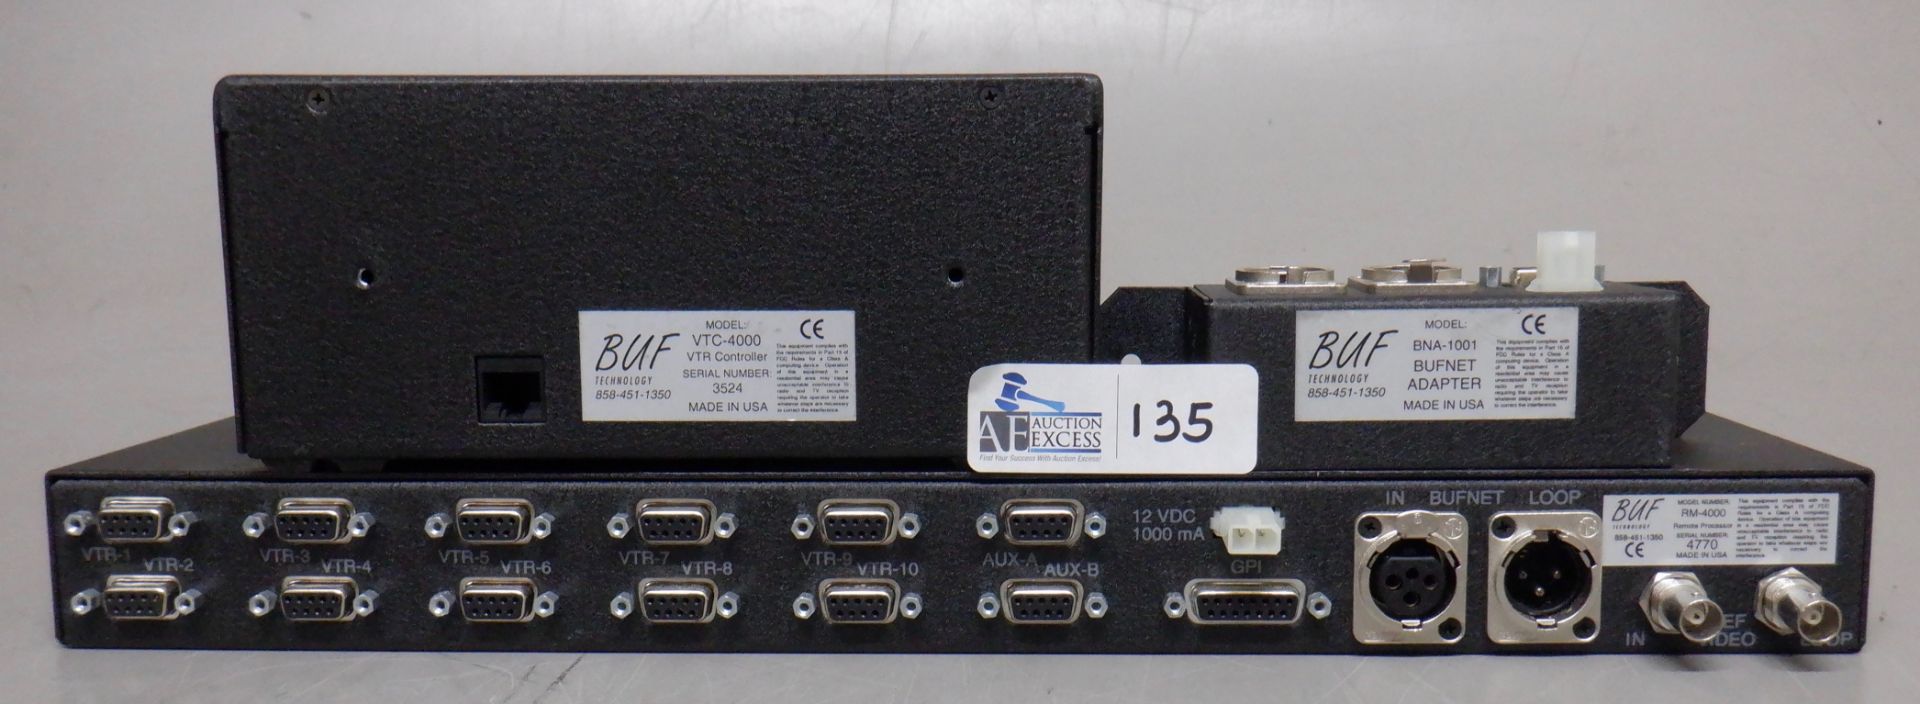 BUF CONTROLLER VTC-4000 WITH BUF RM-4000 - Image 2 of 2